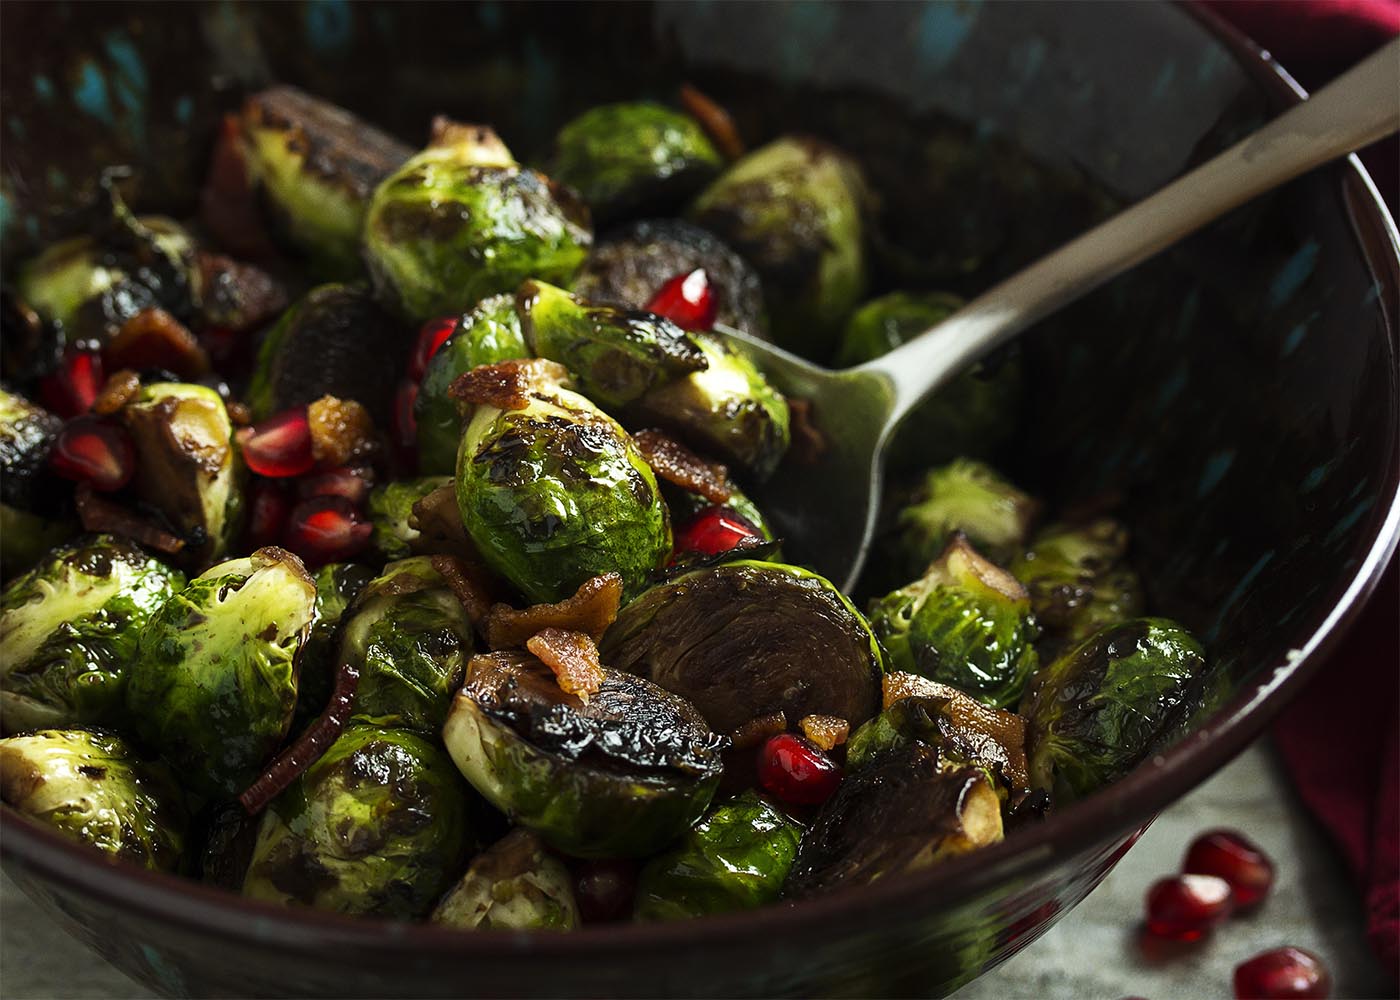 This yummy winter and holiday side dish features pan roasted brussels sprouts, crispy bacon, and sweet pomegranate seeds. Great for Thanksgiving and Christmas or as an easy, weeknight side. | justalittlebitofbacon.com